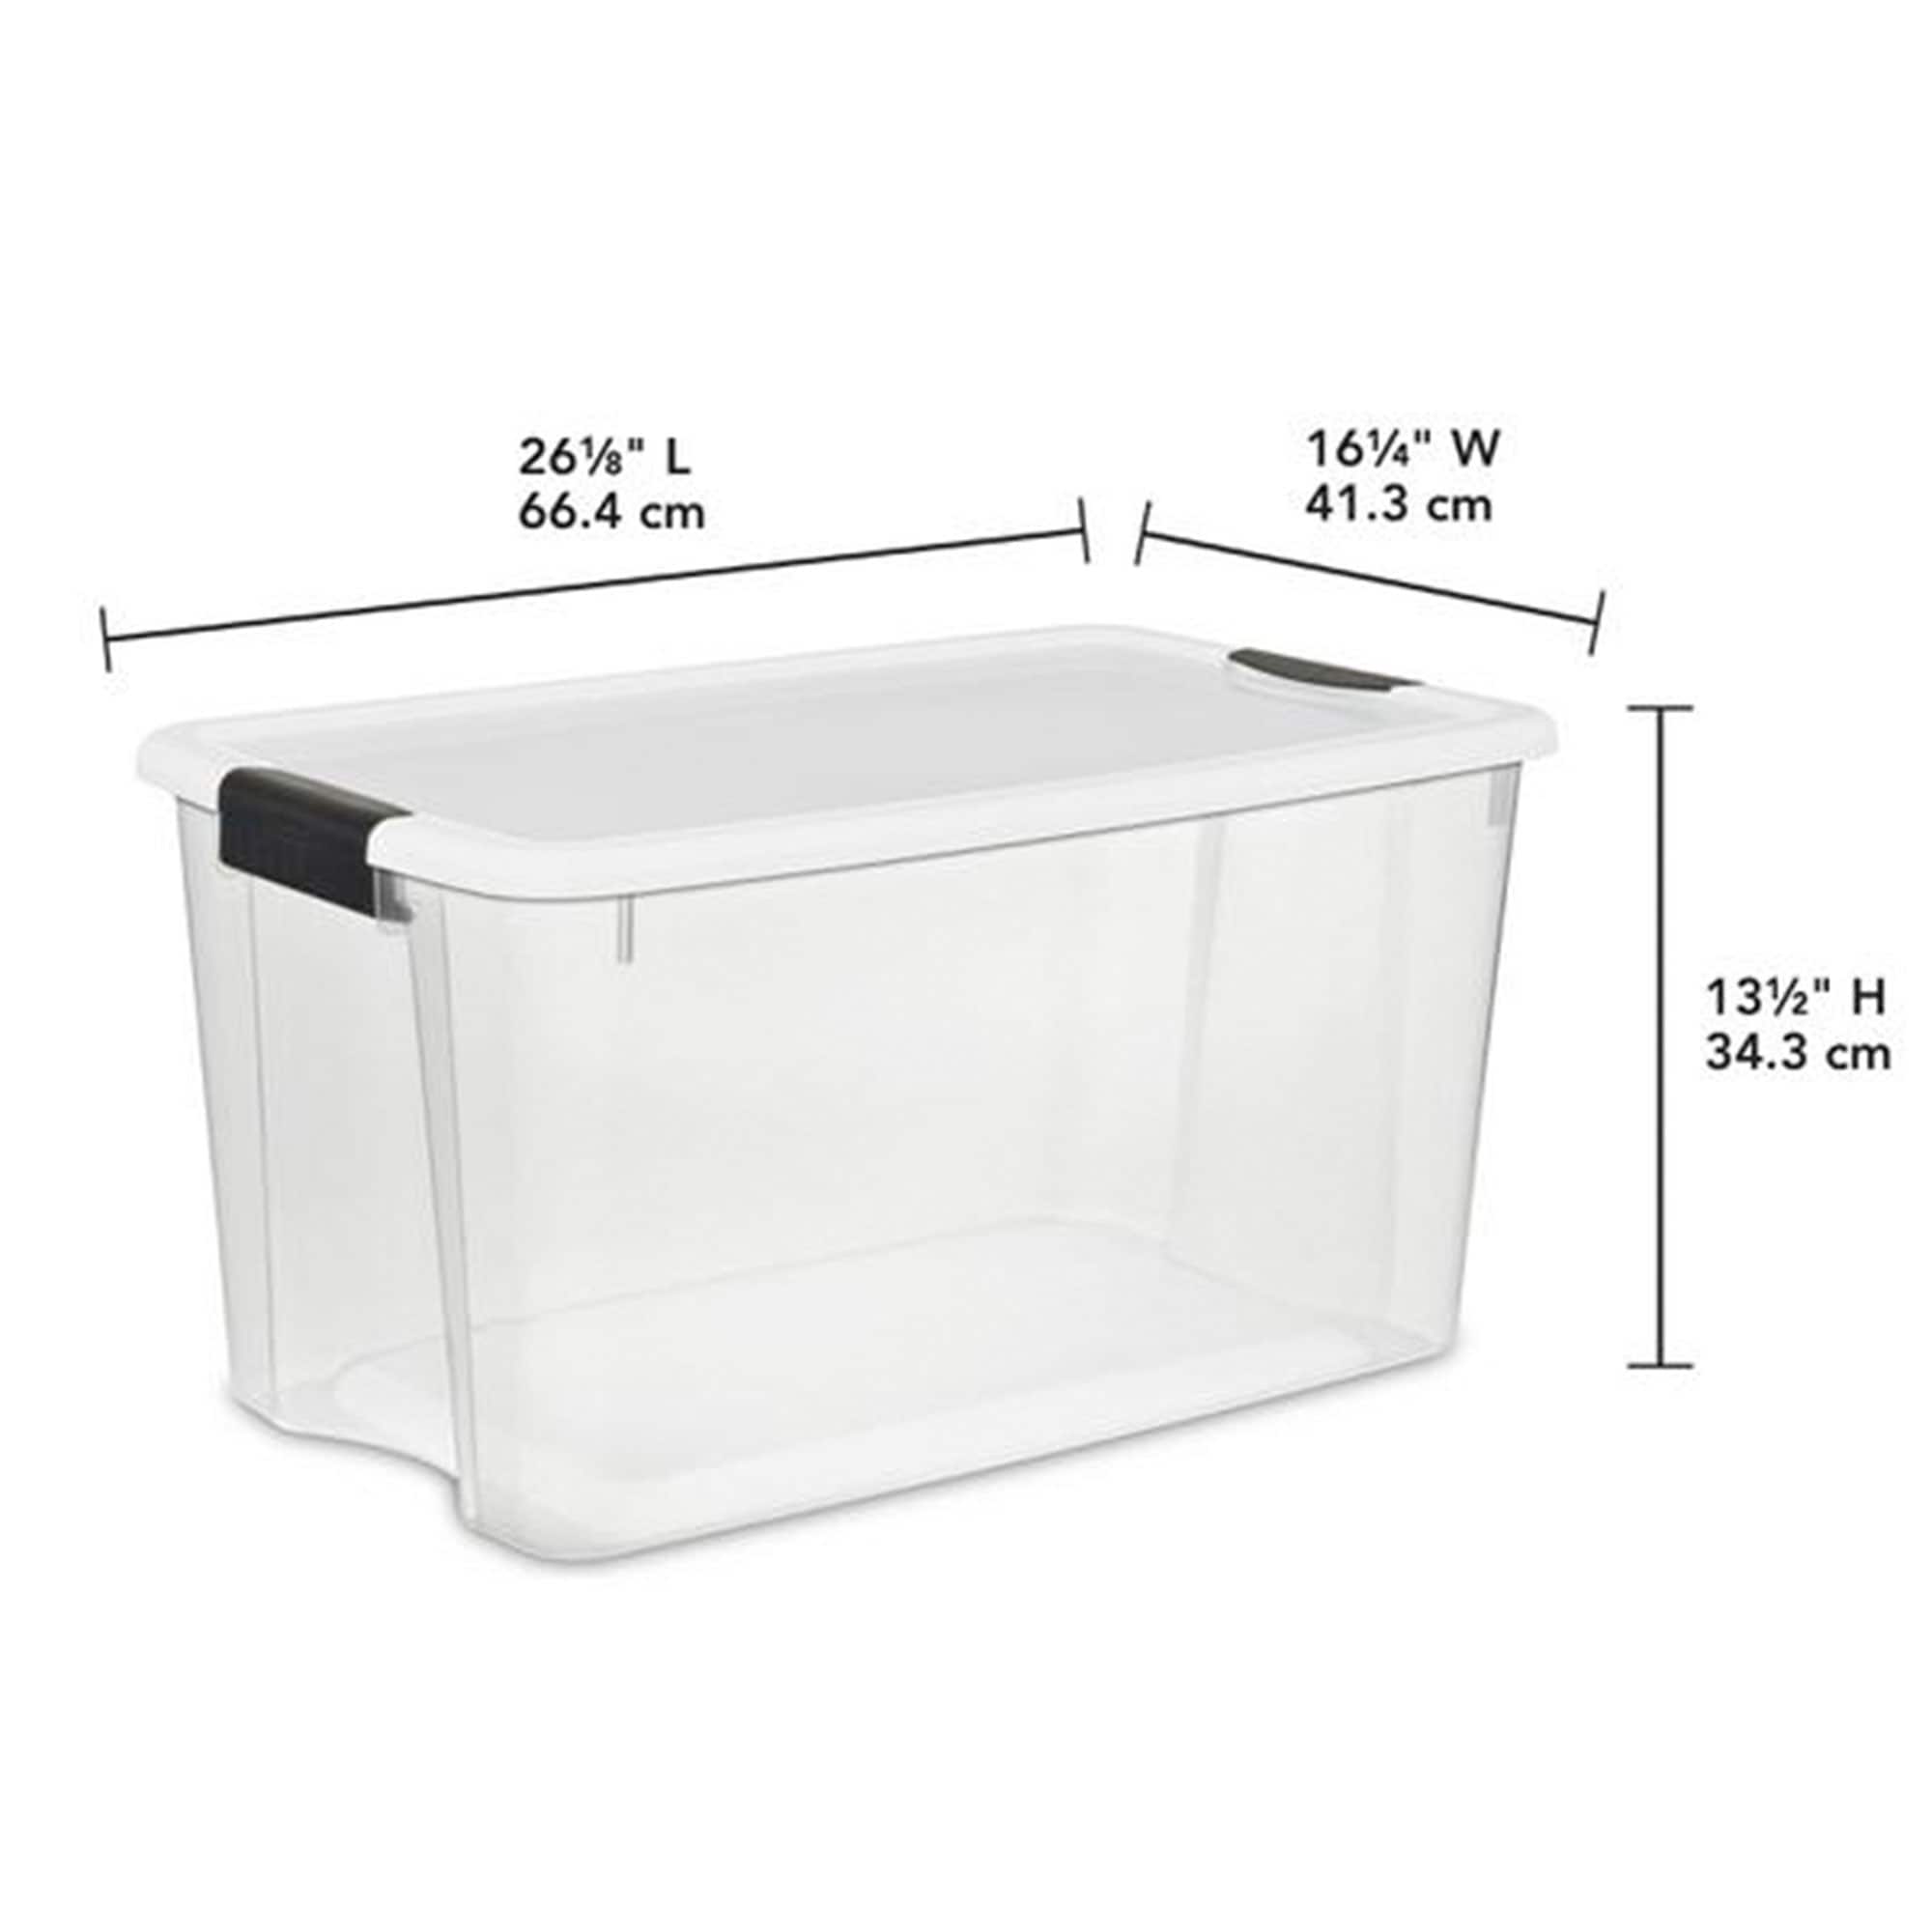 https://ak1.ostkcdn.com/images/products/is/images/direct/4348e9fdaaf4b4928ec6899388f1837be78f1761/Sterilite-70-Quart-Ultra-Storage-Container-Box-%284-Pack%29-%26-6-Quart-Tote-%2812-Pack%29.jpg